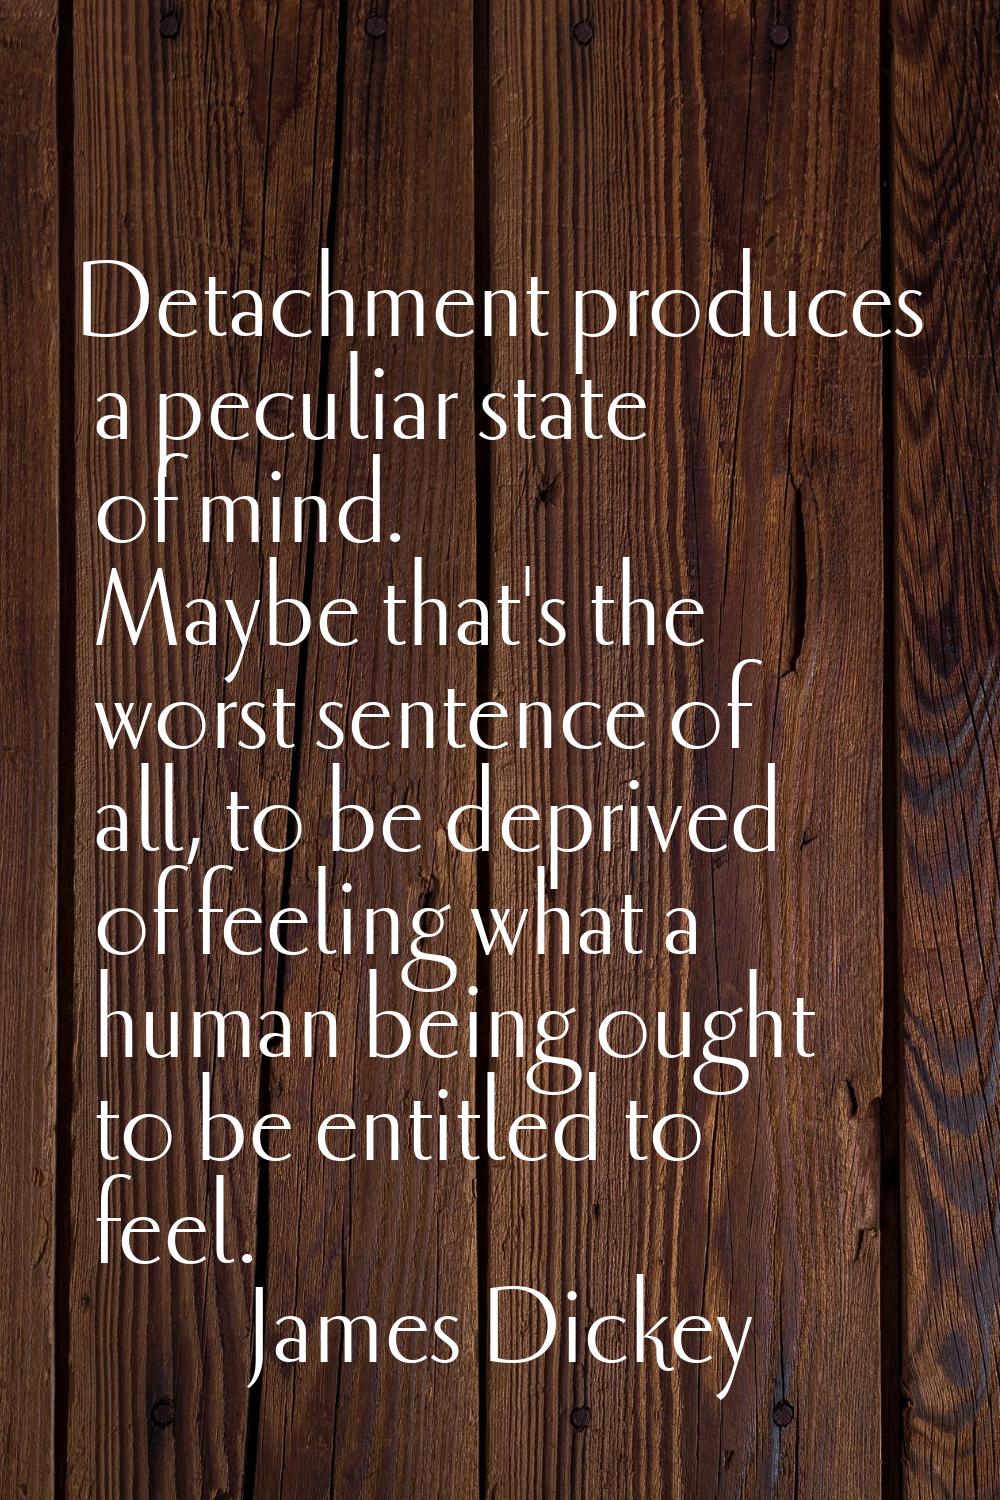 Detachment produces a peculiar state of mind. Maybe that's the worst sentence of all, to be deprive